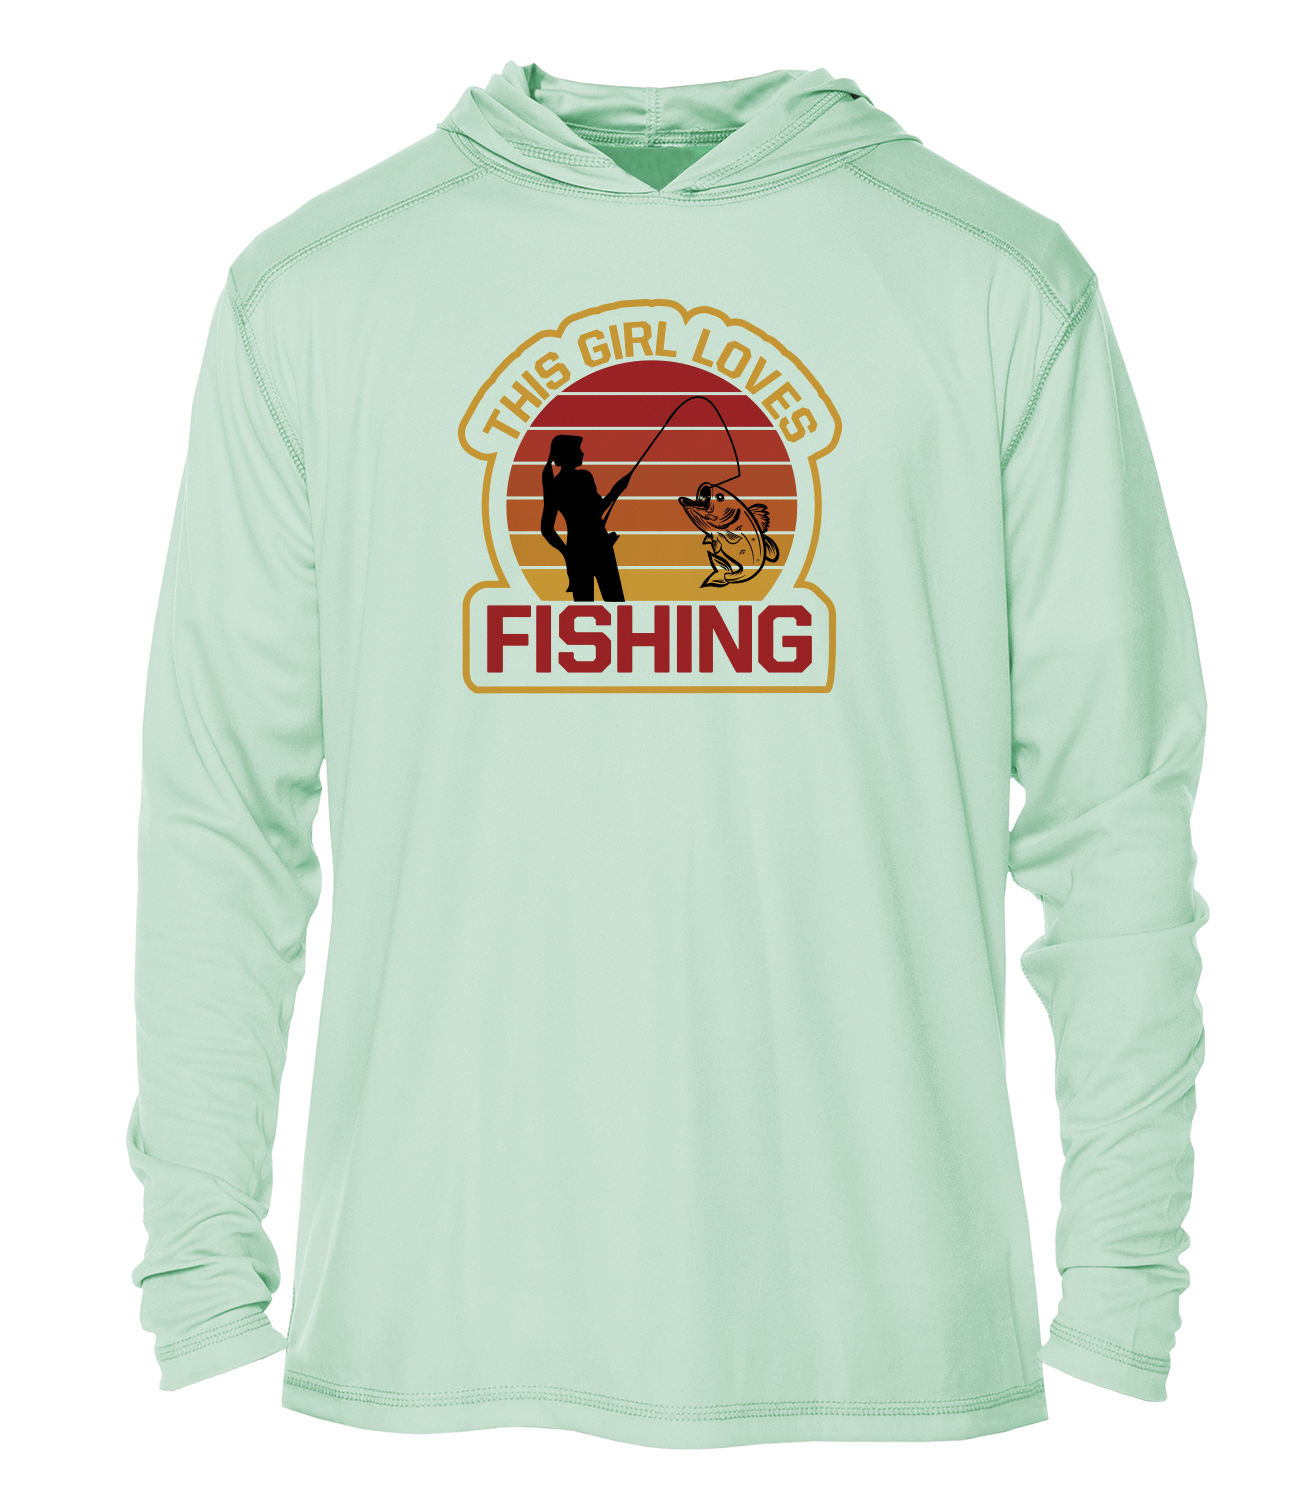 Key West Sun Shirts - This Girl Loves Fishing - UPF 50+ Hoodie - Seagrass,XLG